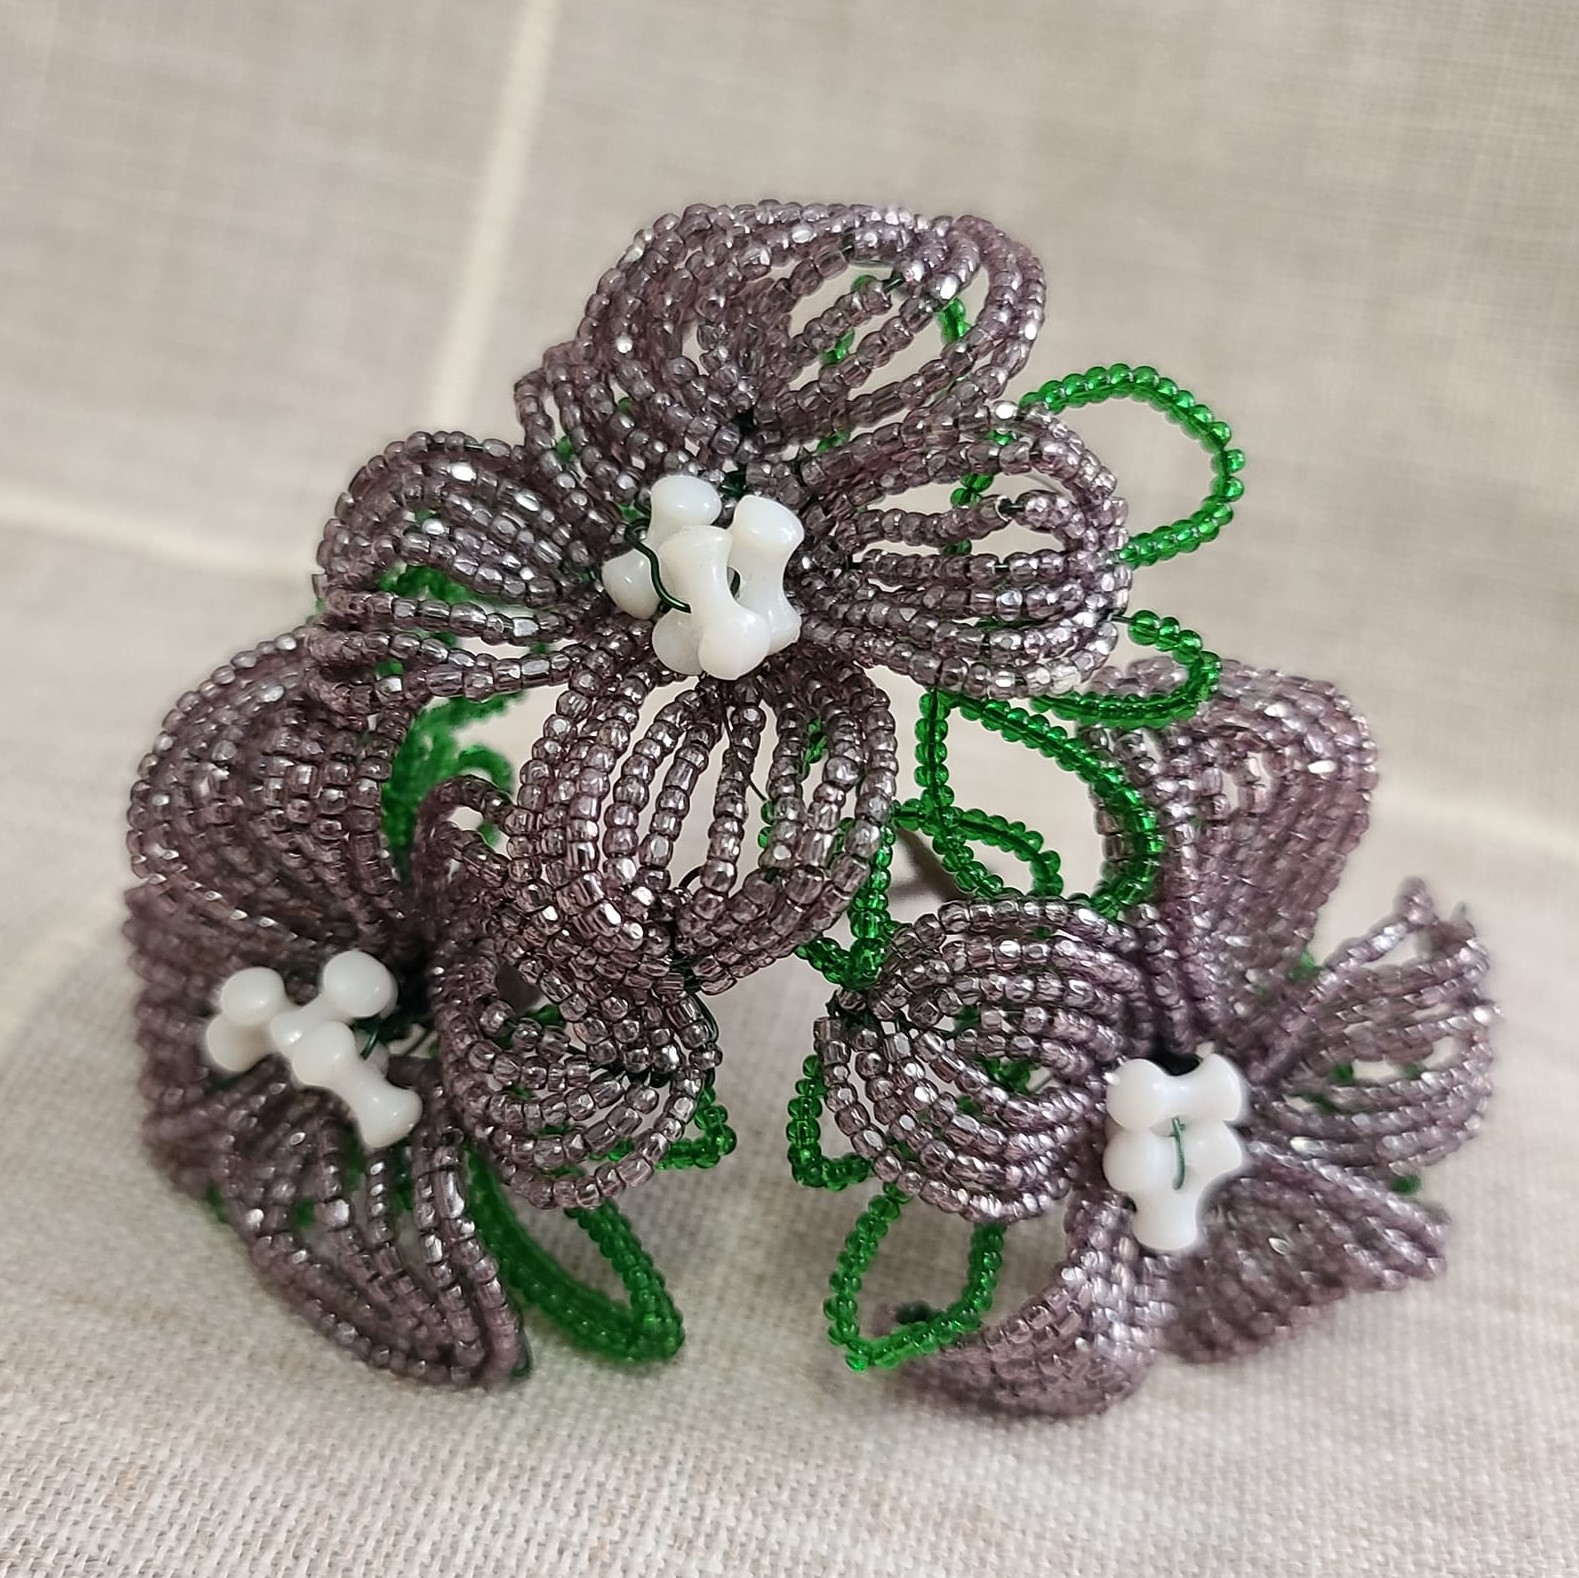 Hand crafted Iridescent Glass Seed Bead Flowers Set of 3